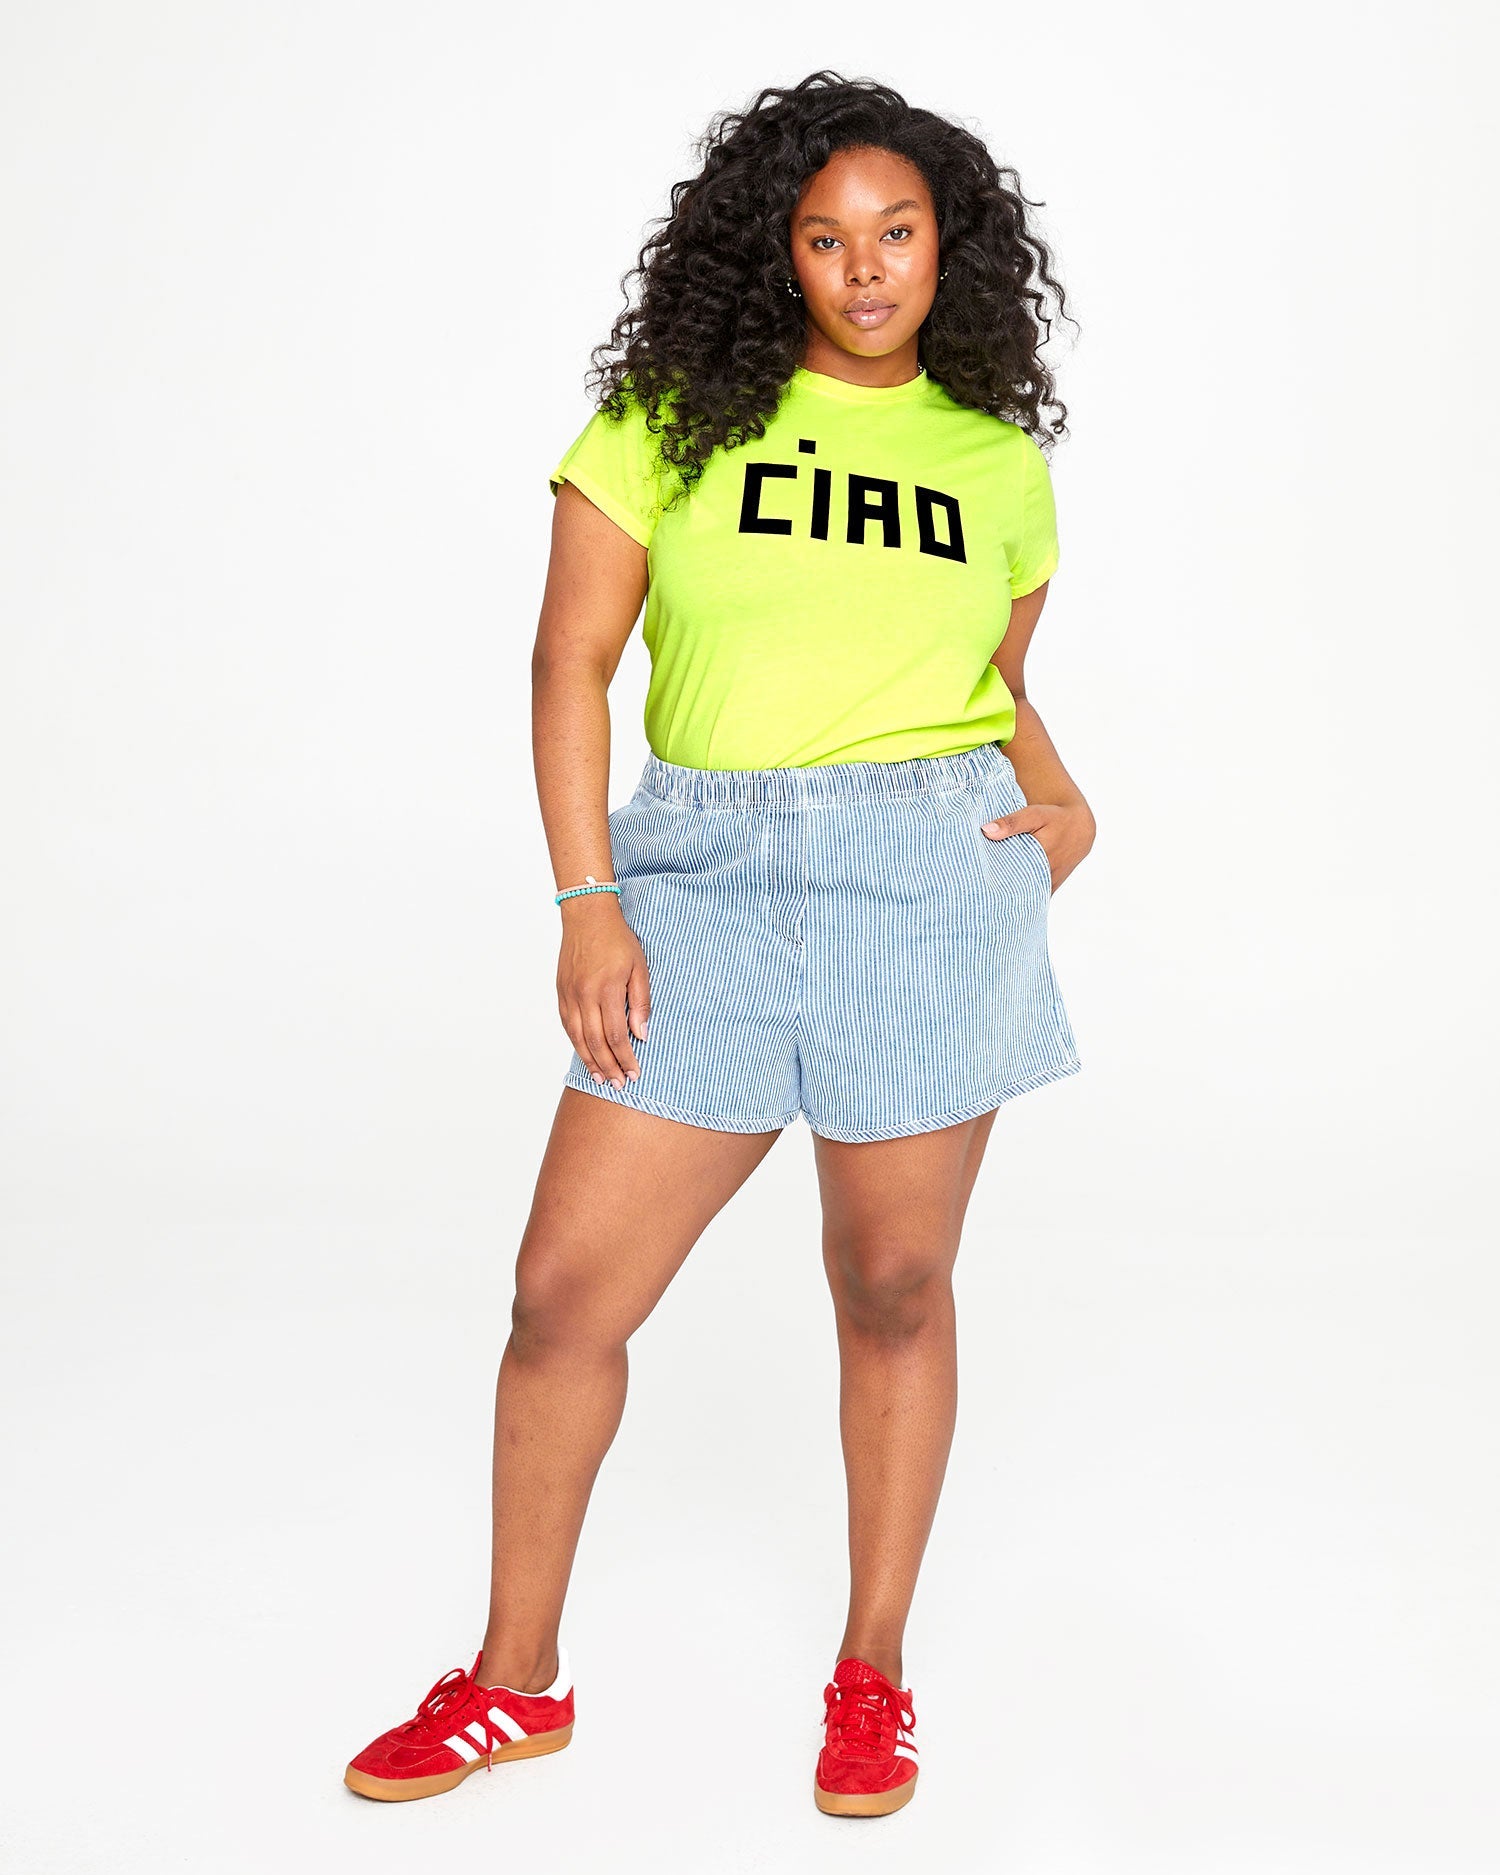 candice wearing the engineer stripe st martin shorts with the neon yellow ciao tee